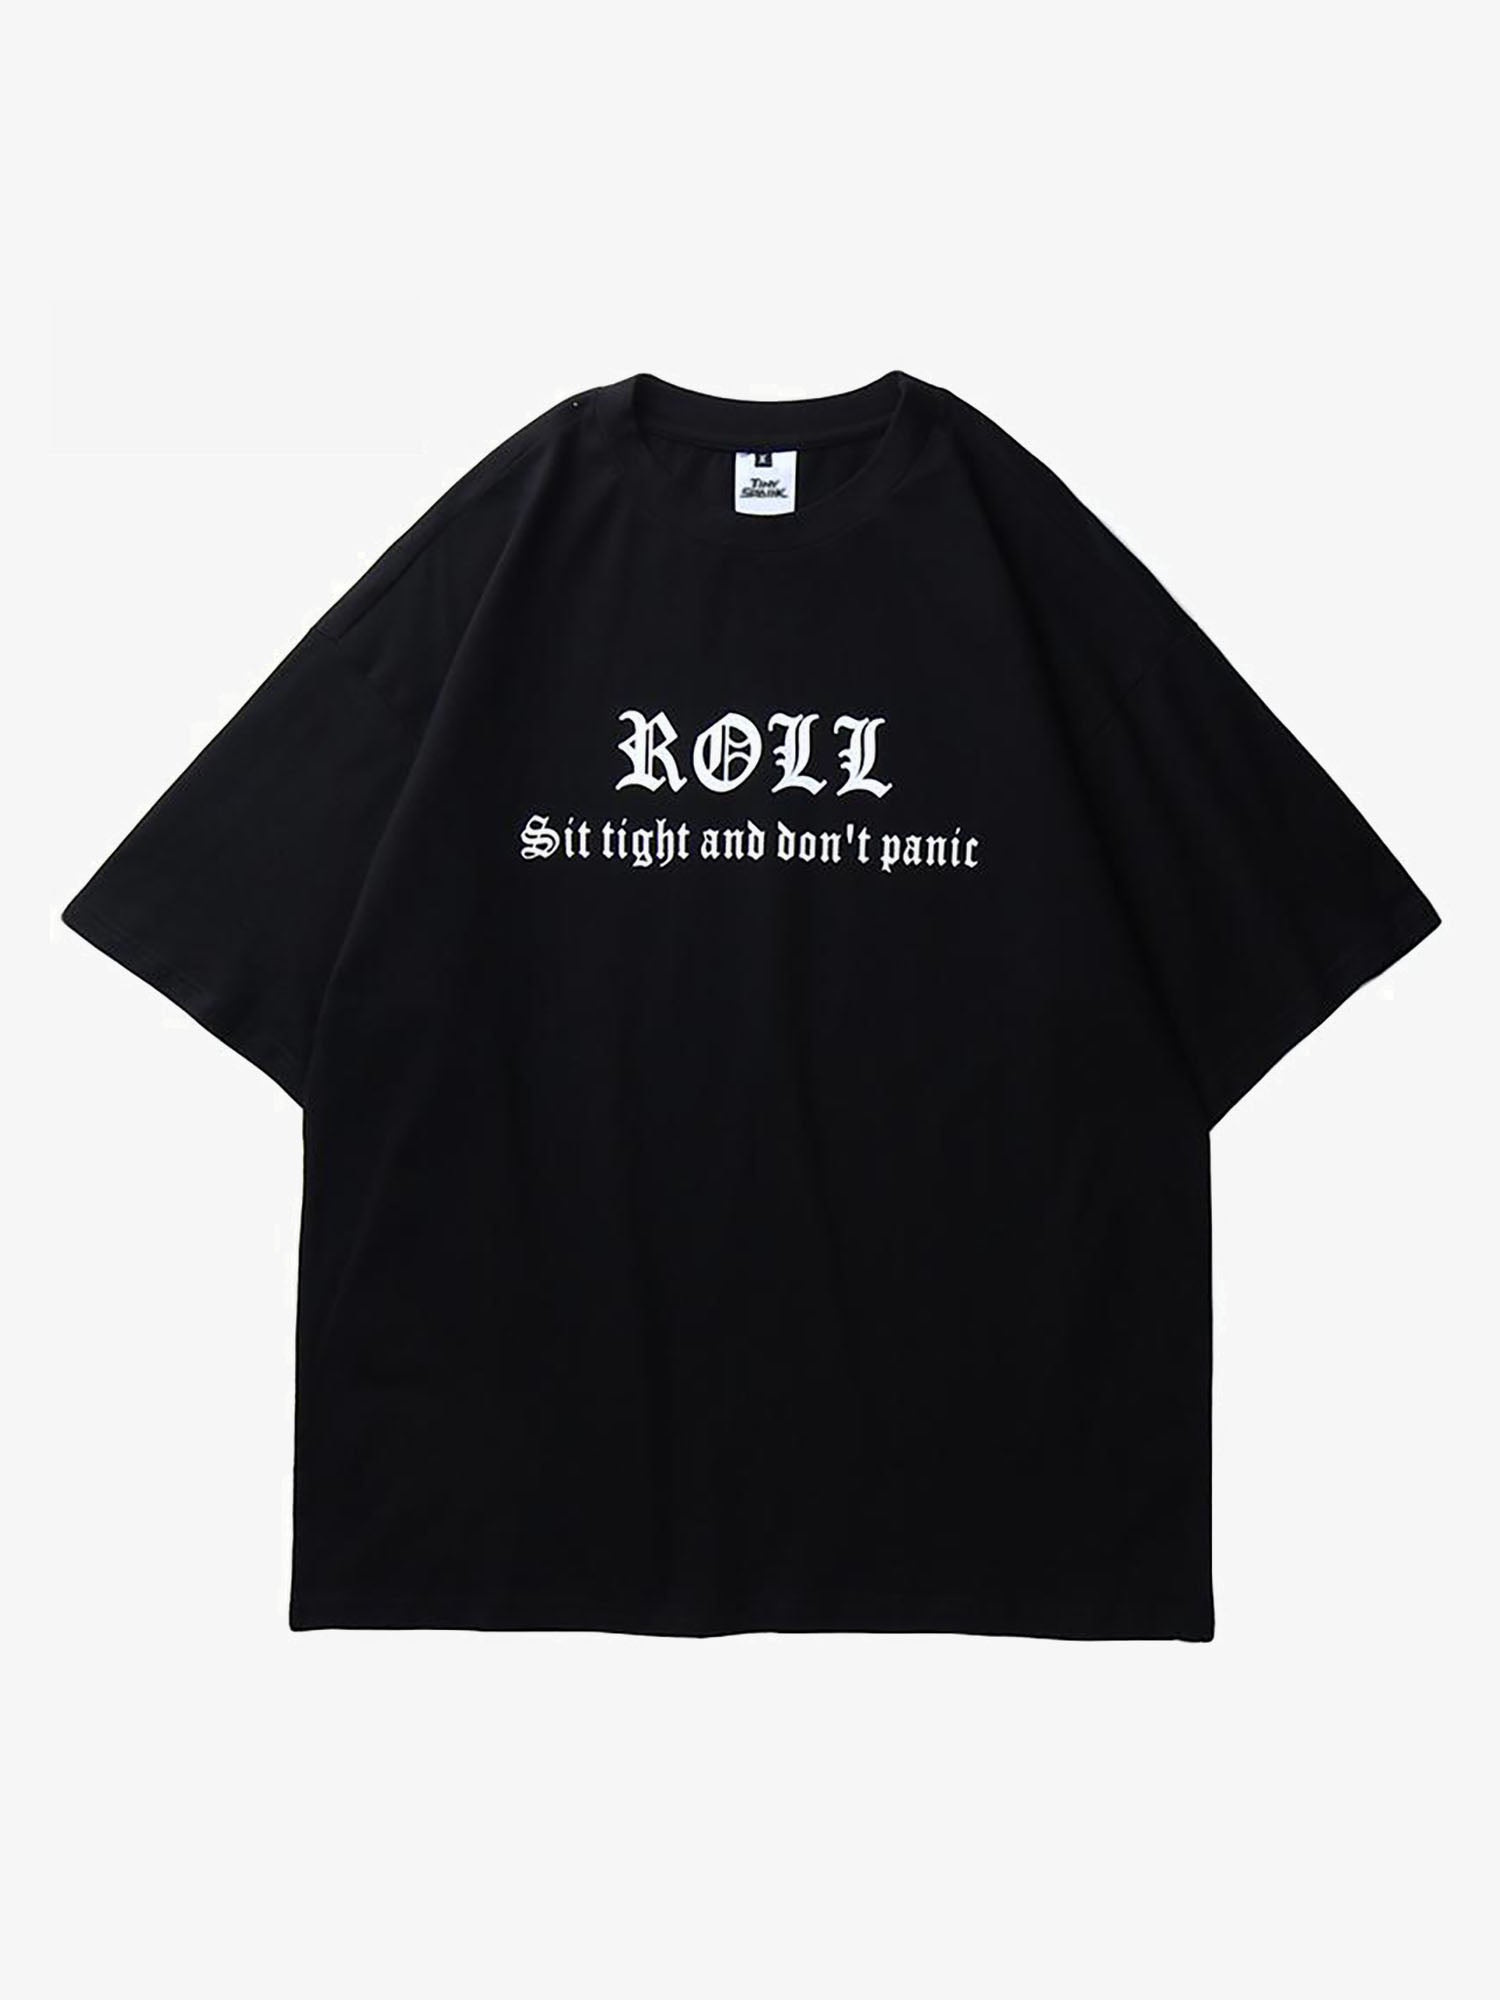 JUSTNOTAG Oversize Letter Printed Short Sleeve Tee